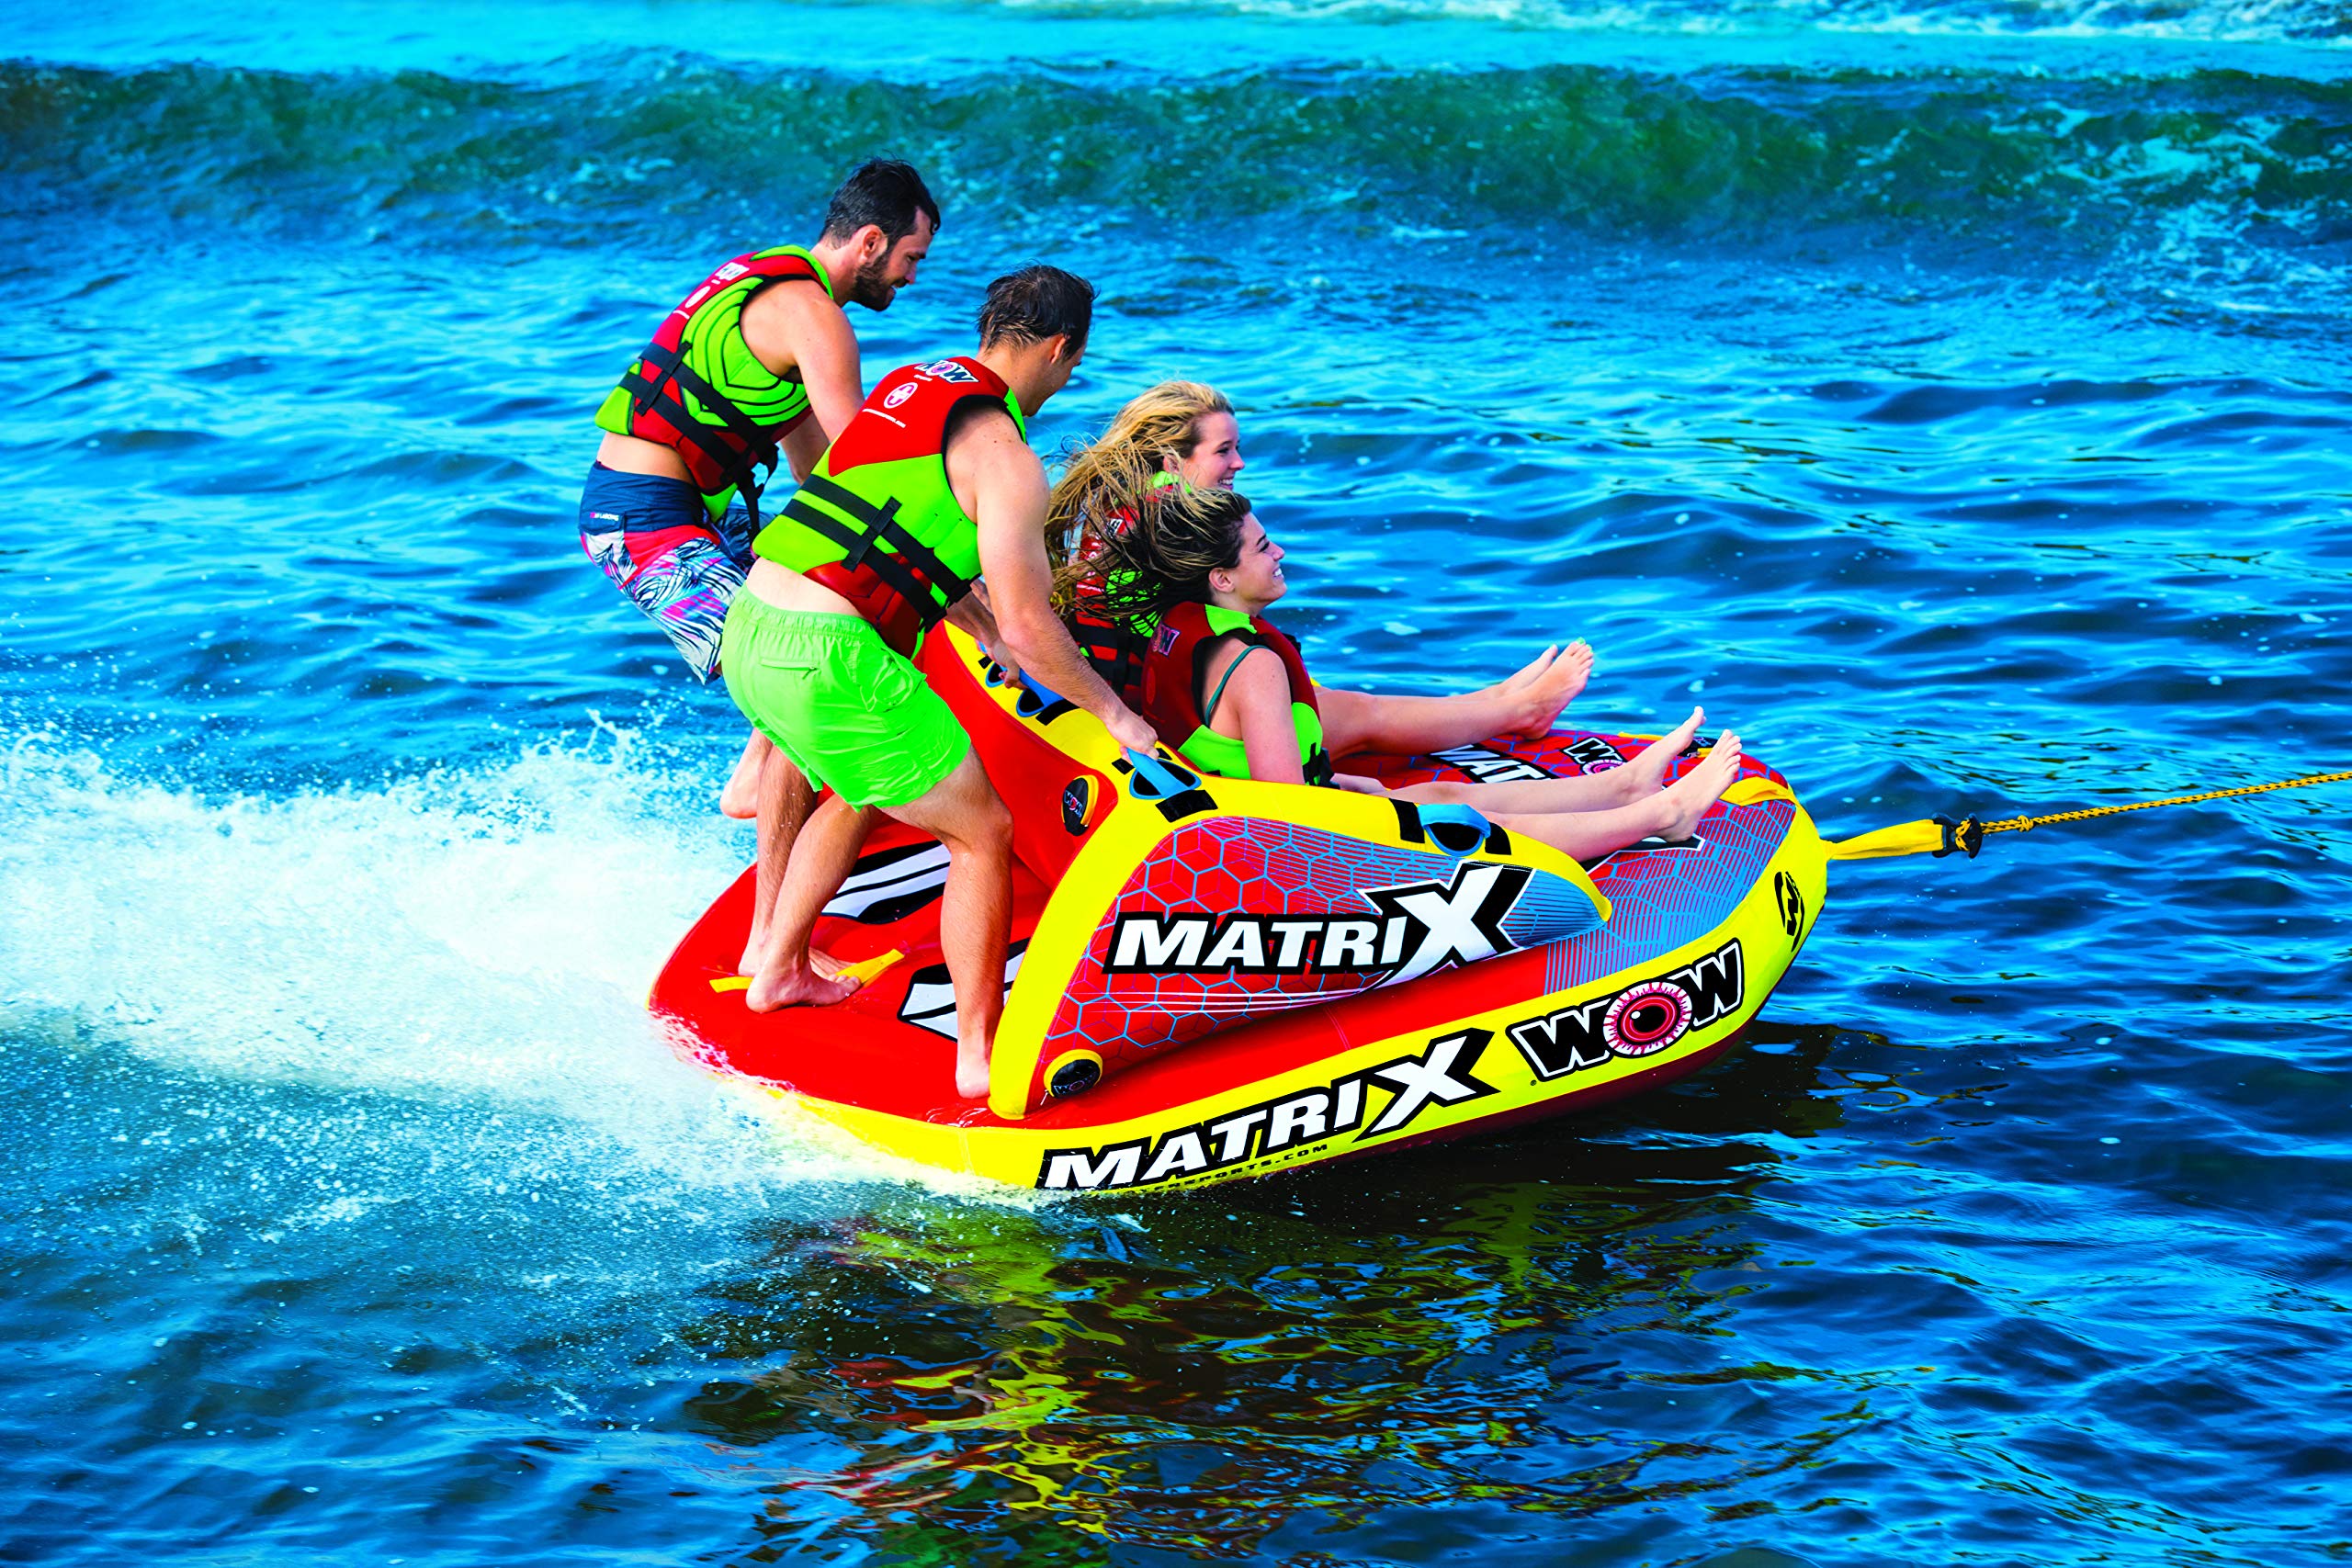 WOW World of Watersports Towable Matrix 1 2 3 or 4 Person Inflatable Towable Deck Tube for Boating, 20-1060